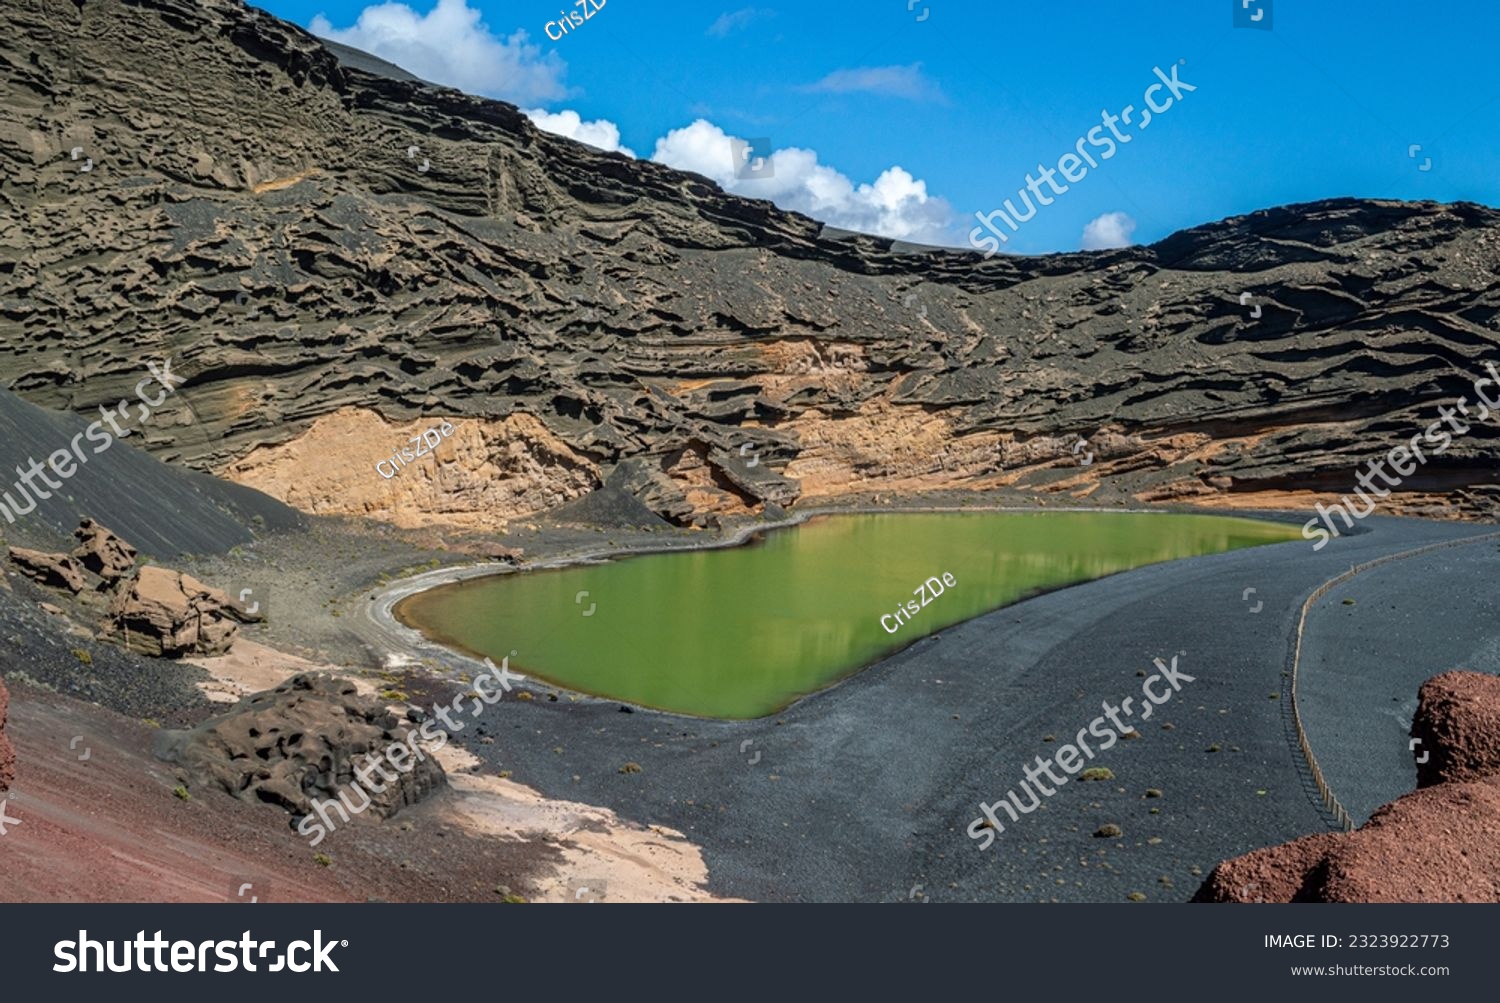 Green Lagoon or Charco de los Clicos. The green coloration is due to sulfur and algae. It is the crater of a volcano that has been invaded by the ocean. Also formed by a black sand beach. #2323922773